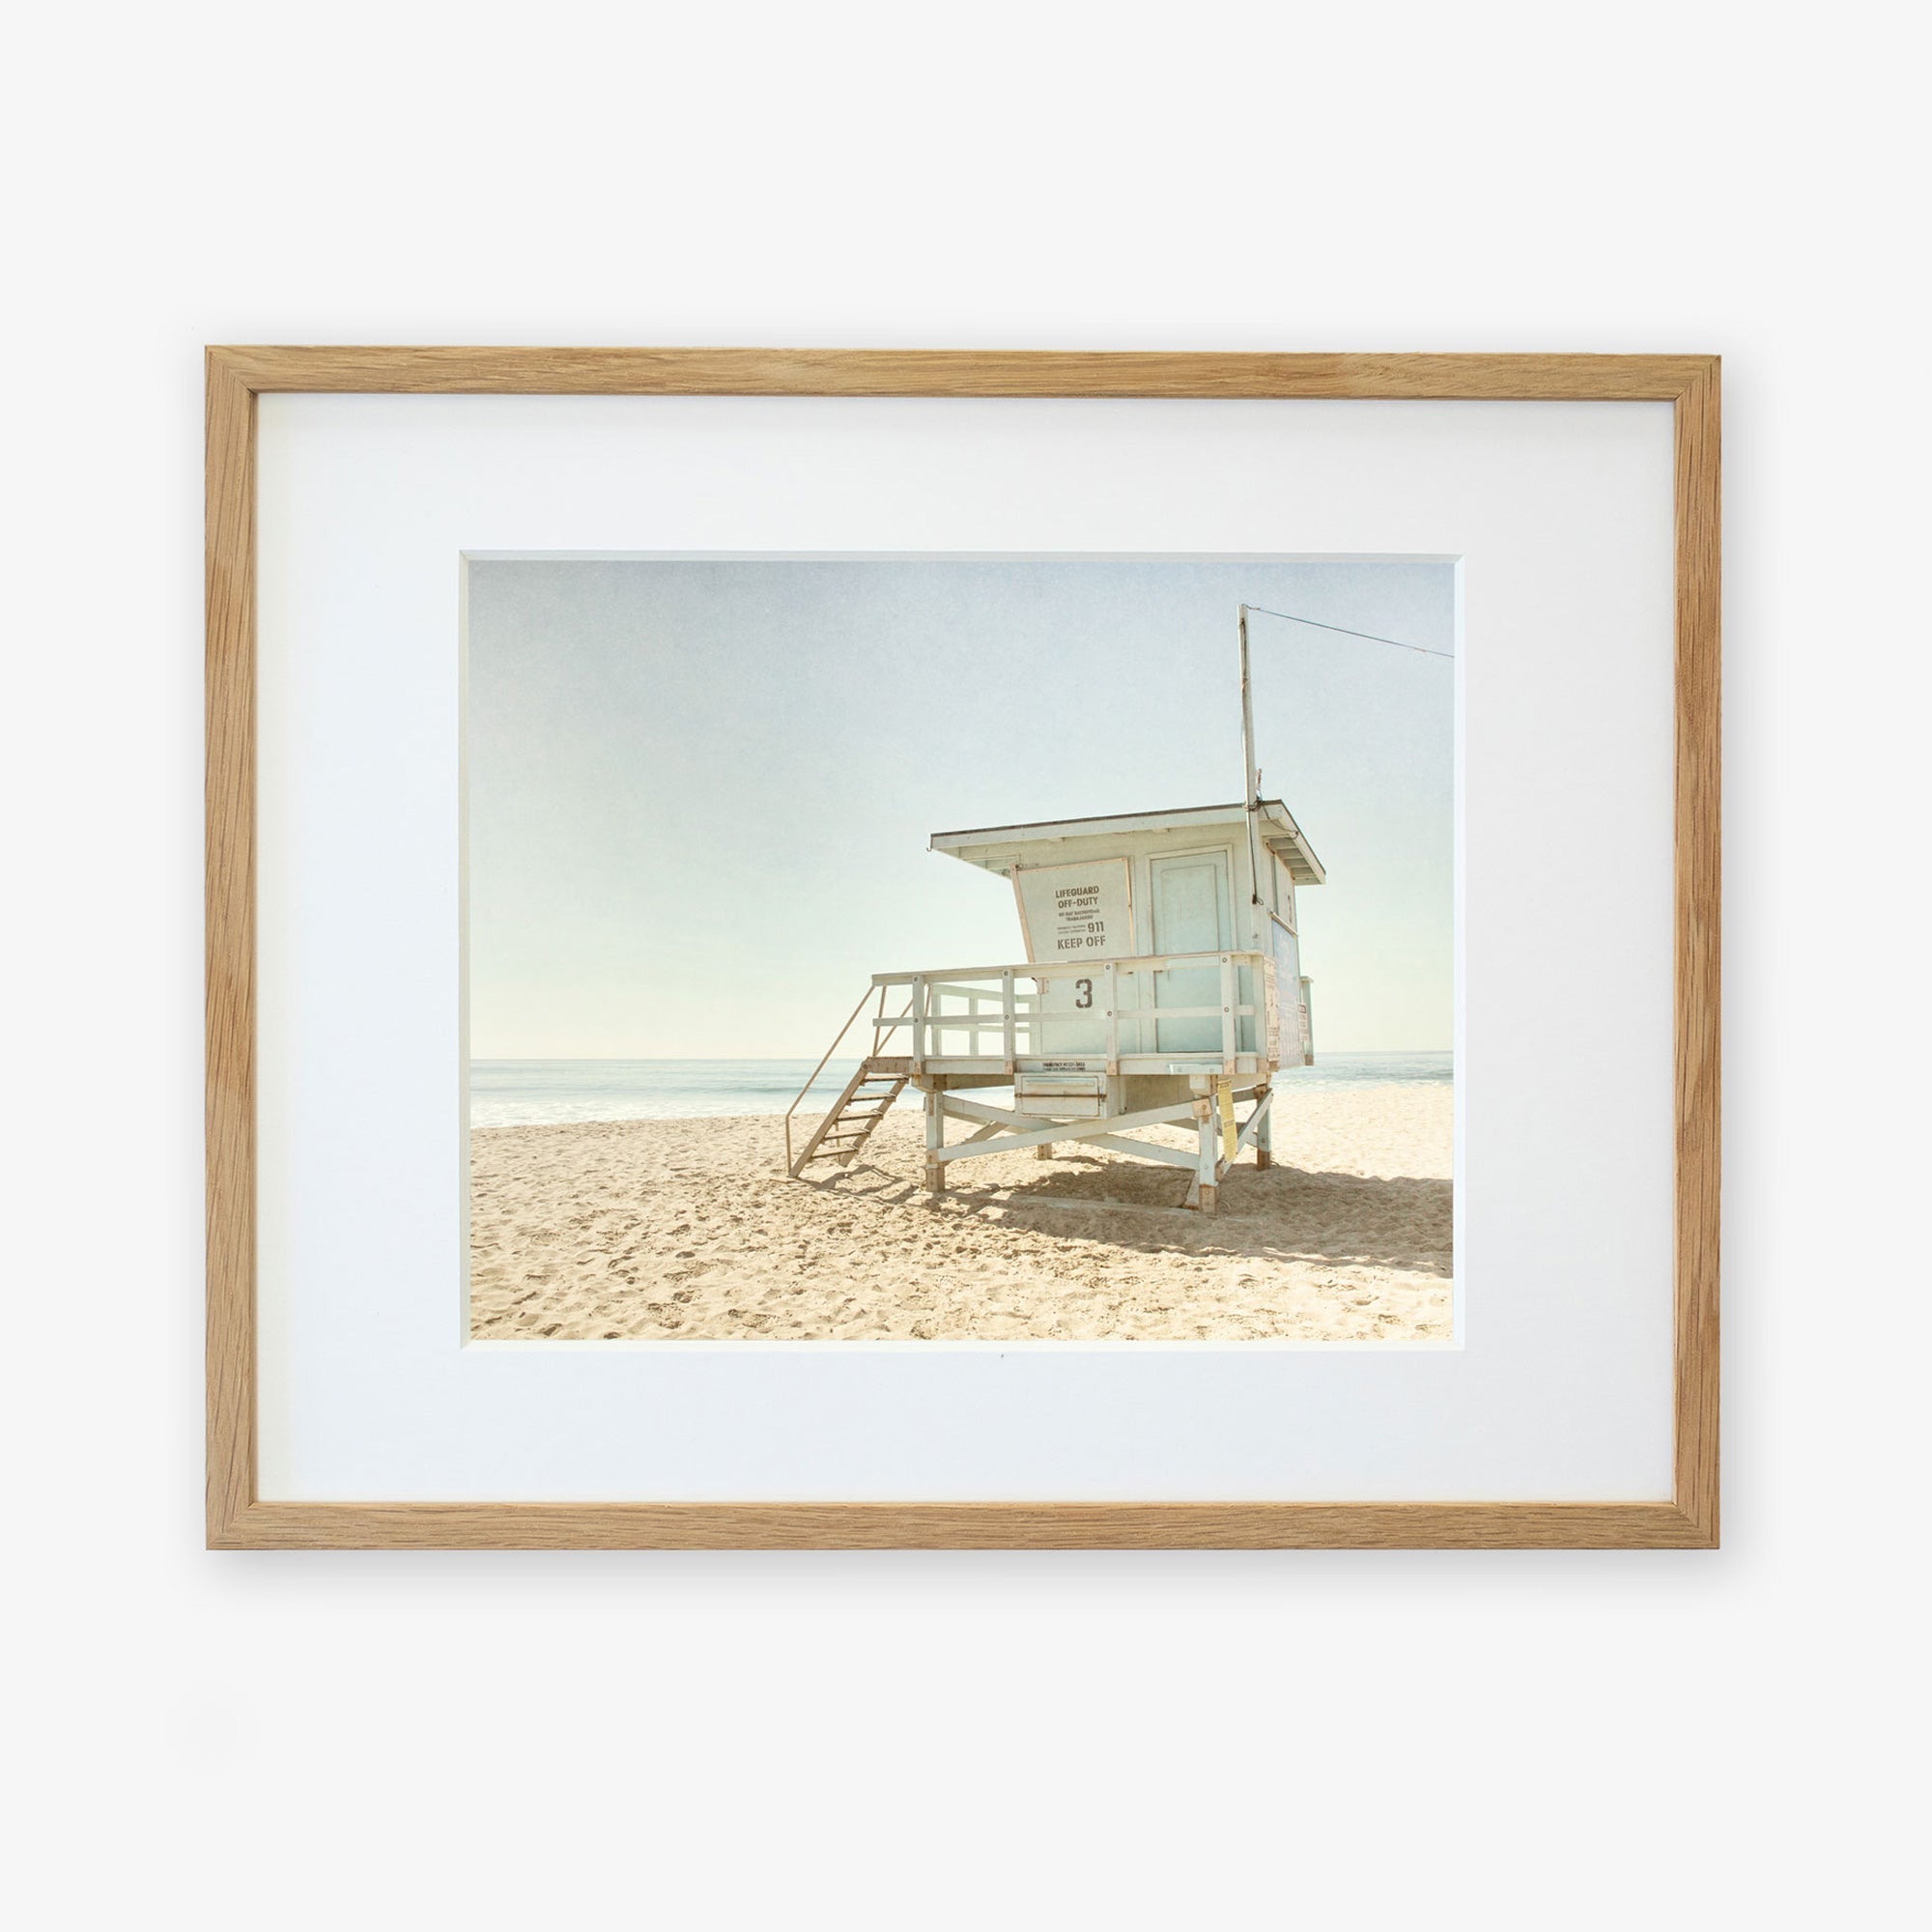 A framed photograph depicting a solitary beach lifeguard station on sandy shores under a clear sky. The guard station, numbered &quot;3&quot; and located in Malibu, features a small set of steps leading to Offley Green&#39;s California Summer Beach Art, &#39;Malibu Lifeguard Tower&#39;.